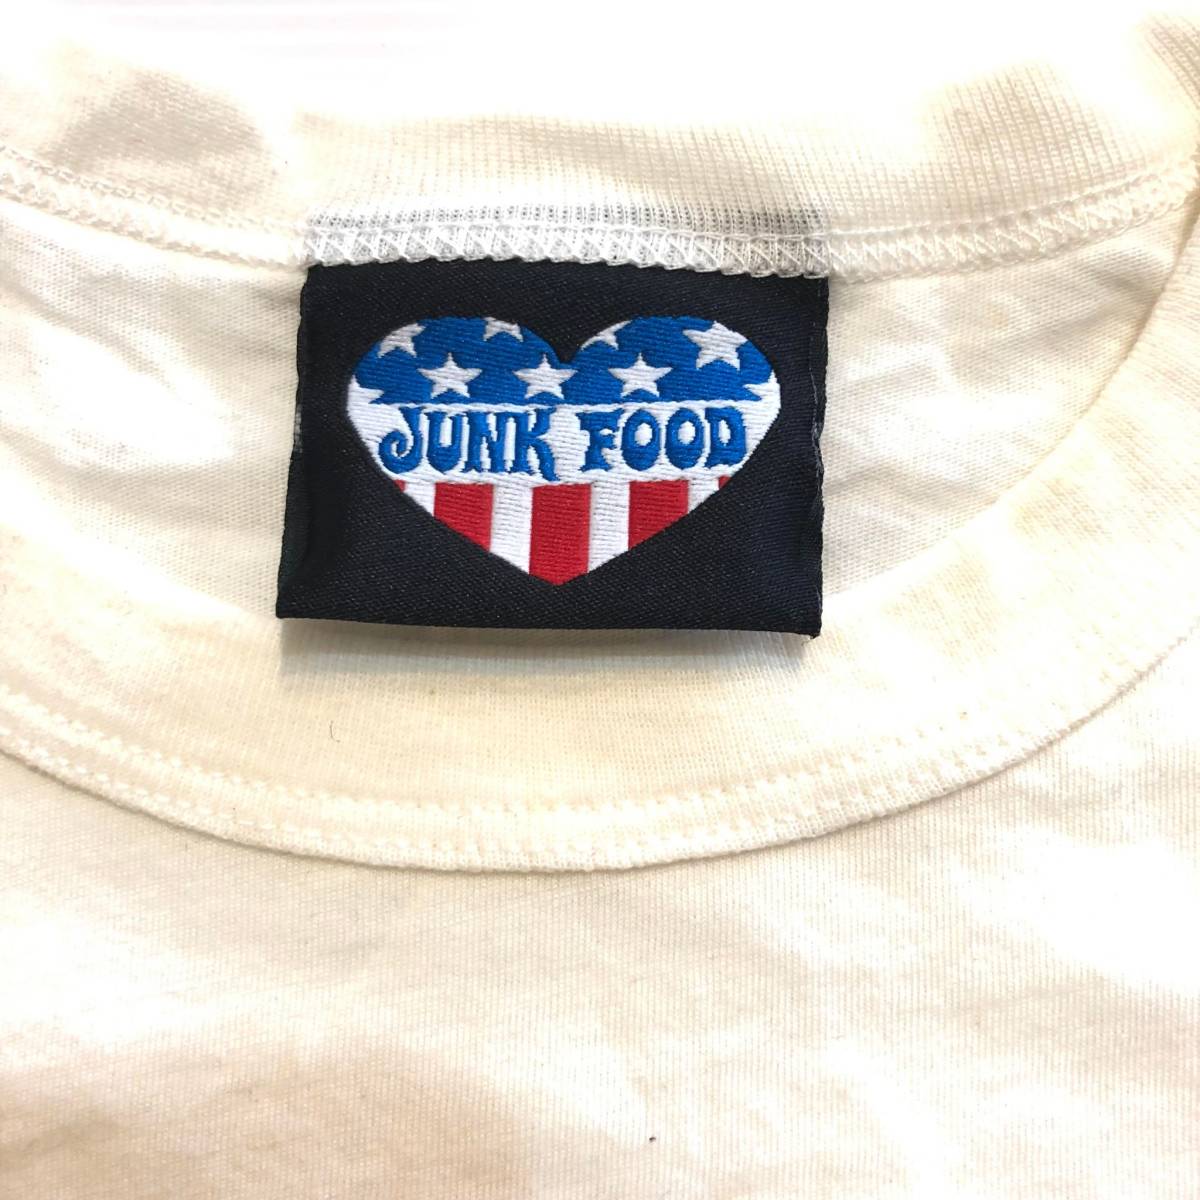 ◎JUNKFOOD ジャンクフード 半袖 Tシャツ サイズS クリーム系 トップス 綿100% used　made in USA_画像5